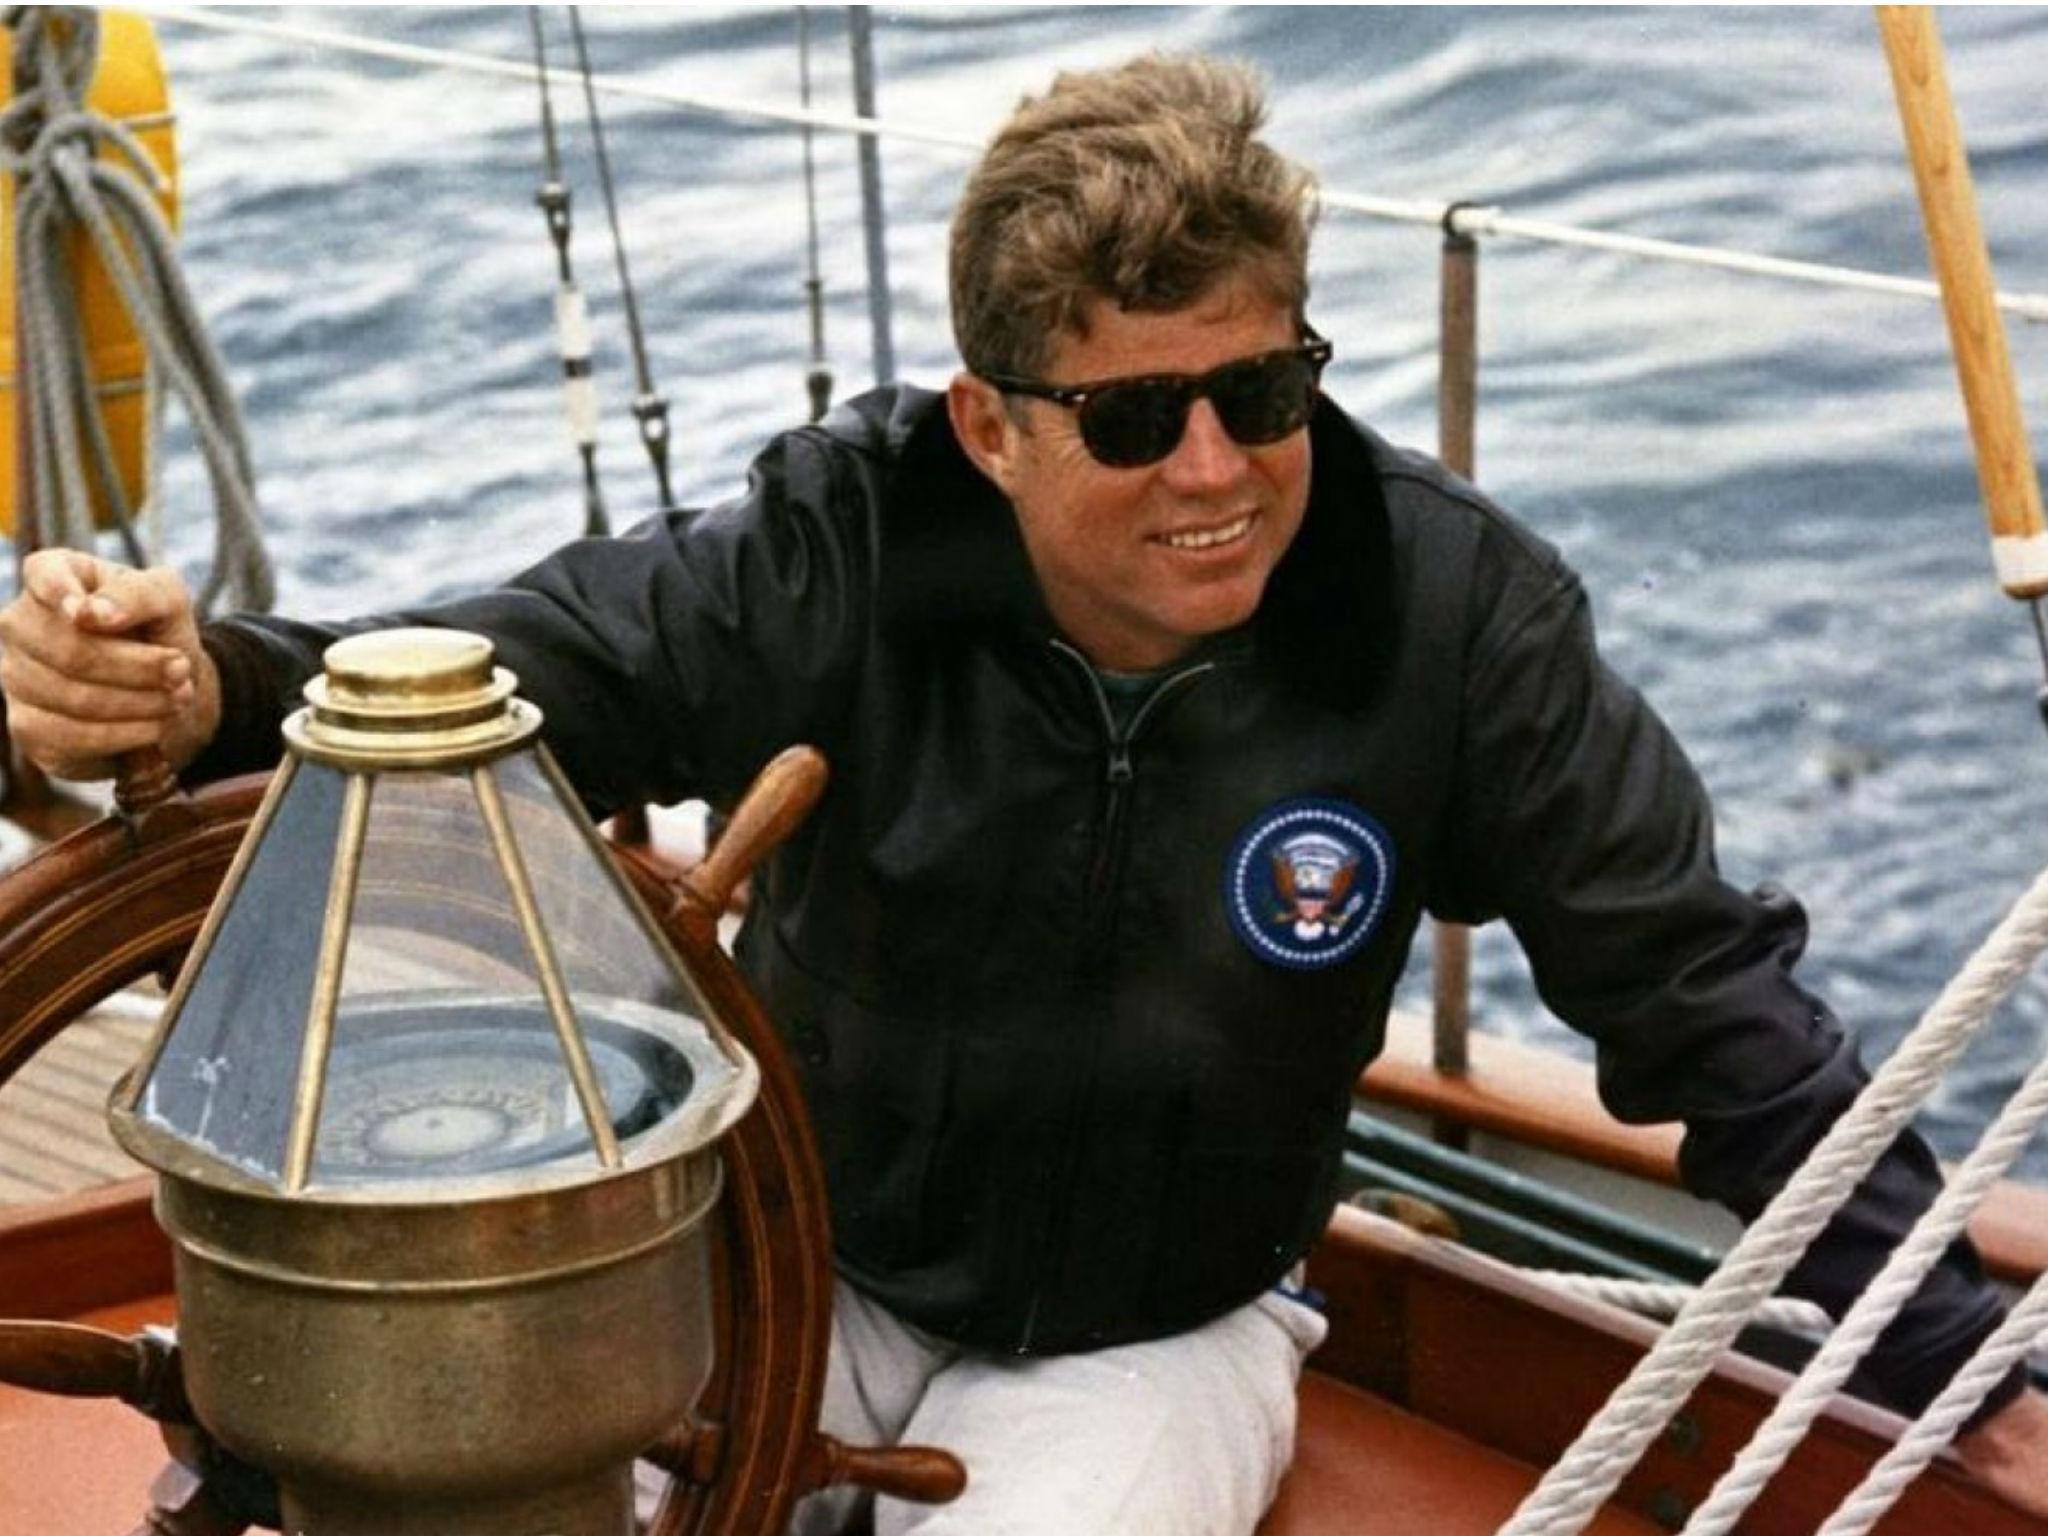 John F Kennedy sailing off the coast of Maine in 1962. The President sought to project a rugged image, without signs of weakness and emotion